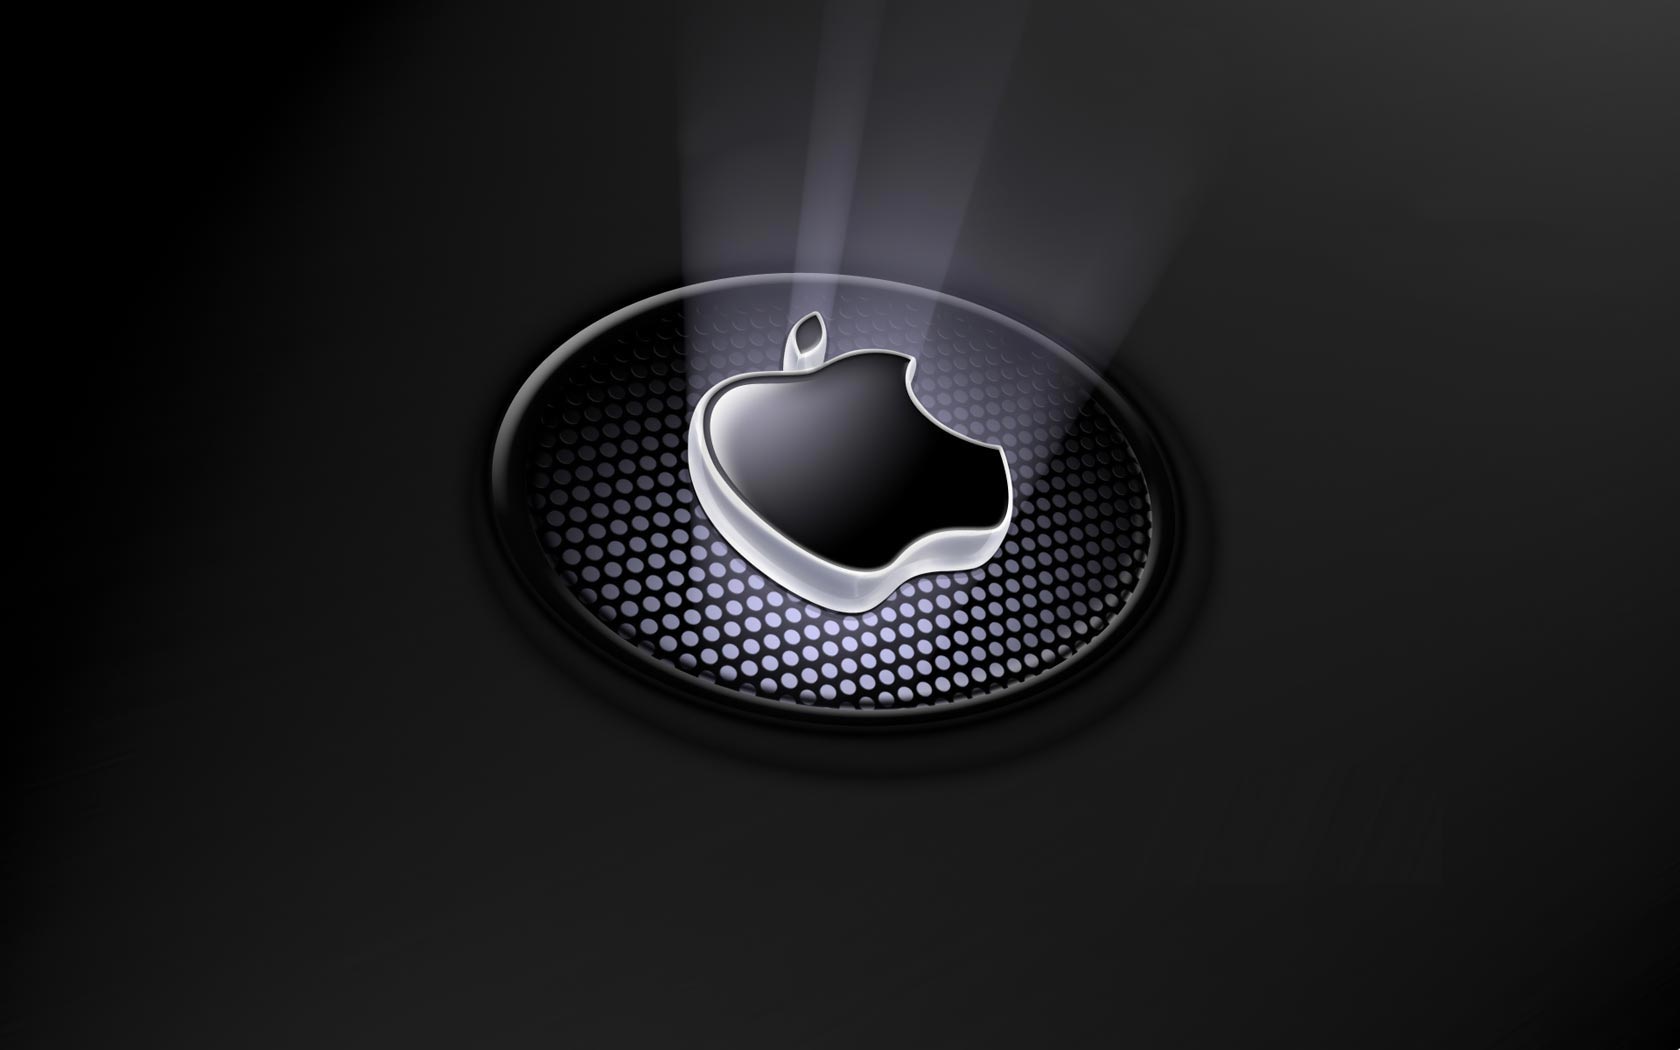 Get Apple Logo Background HD Wallpaper And Make This